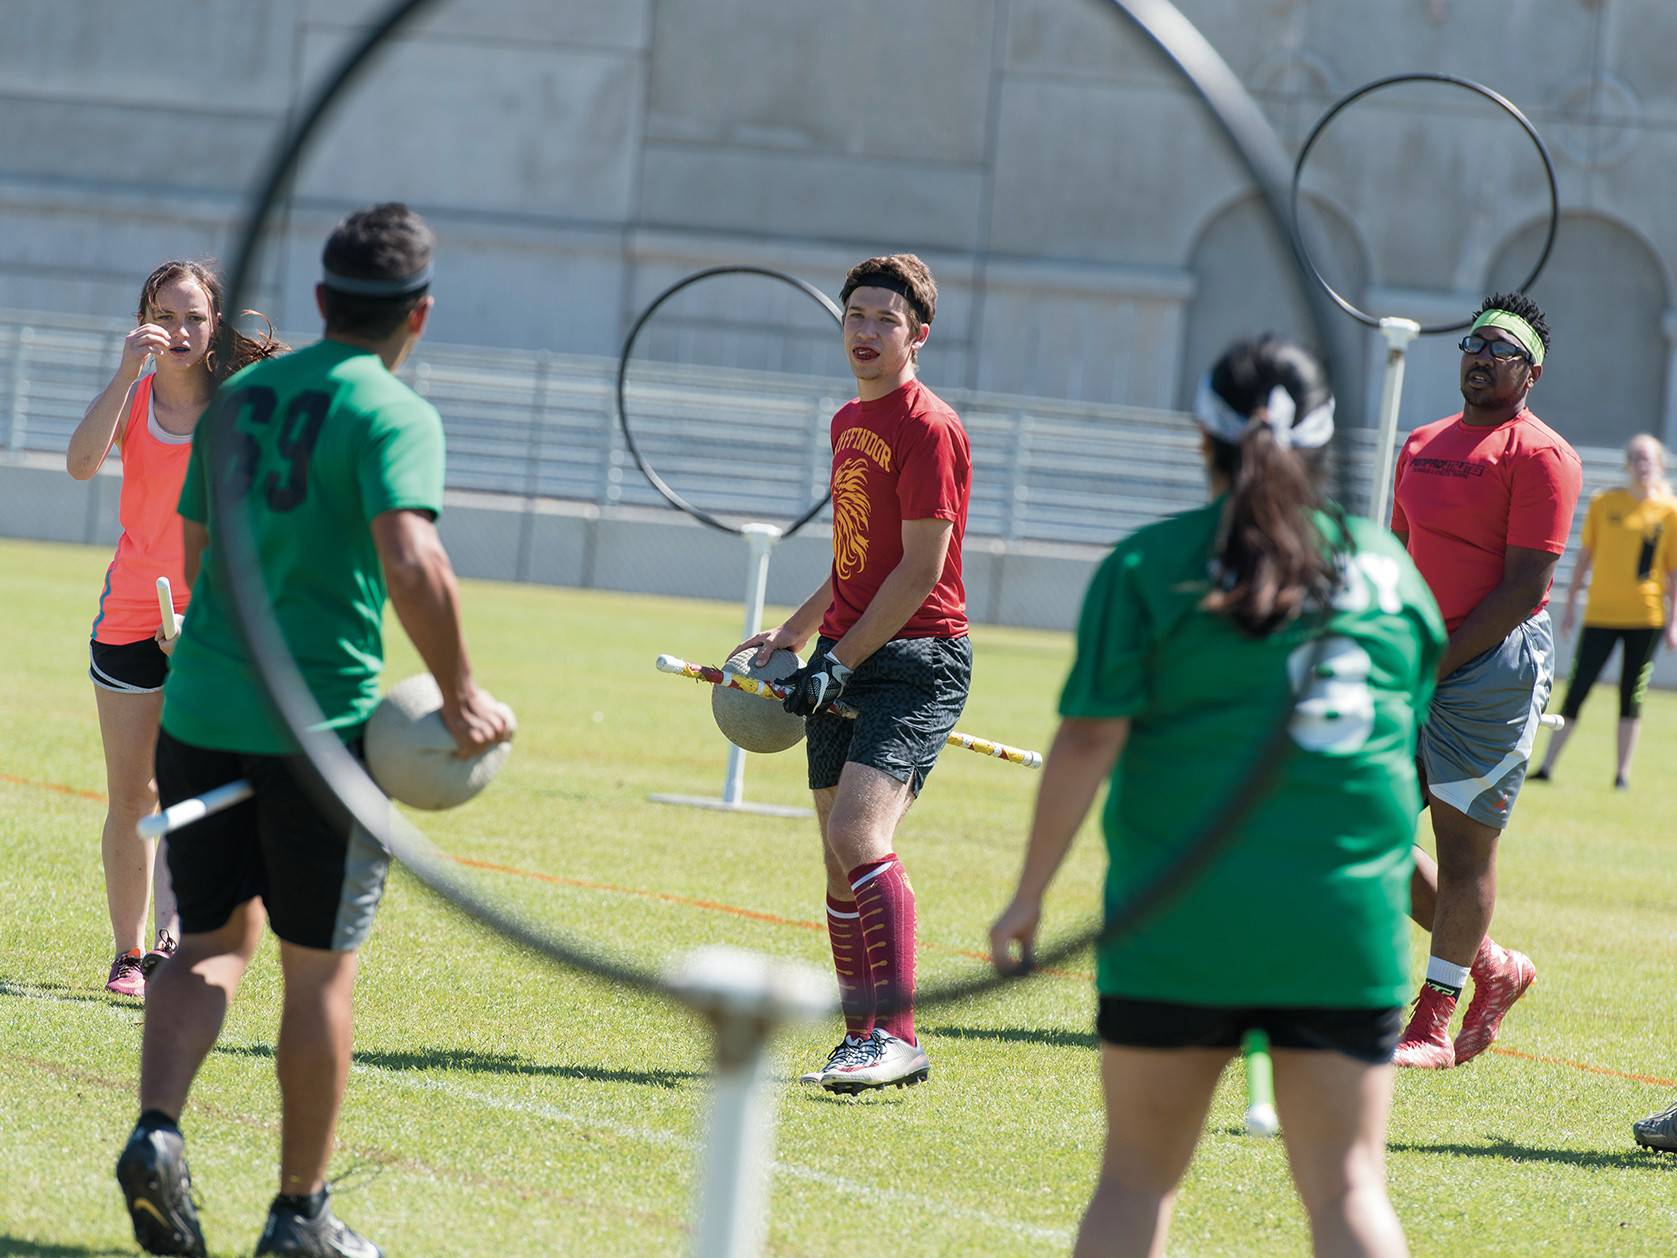 Bobcats playing Quidditch